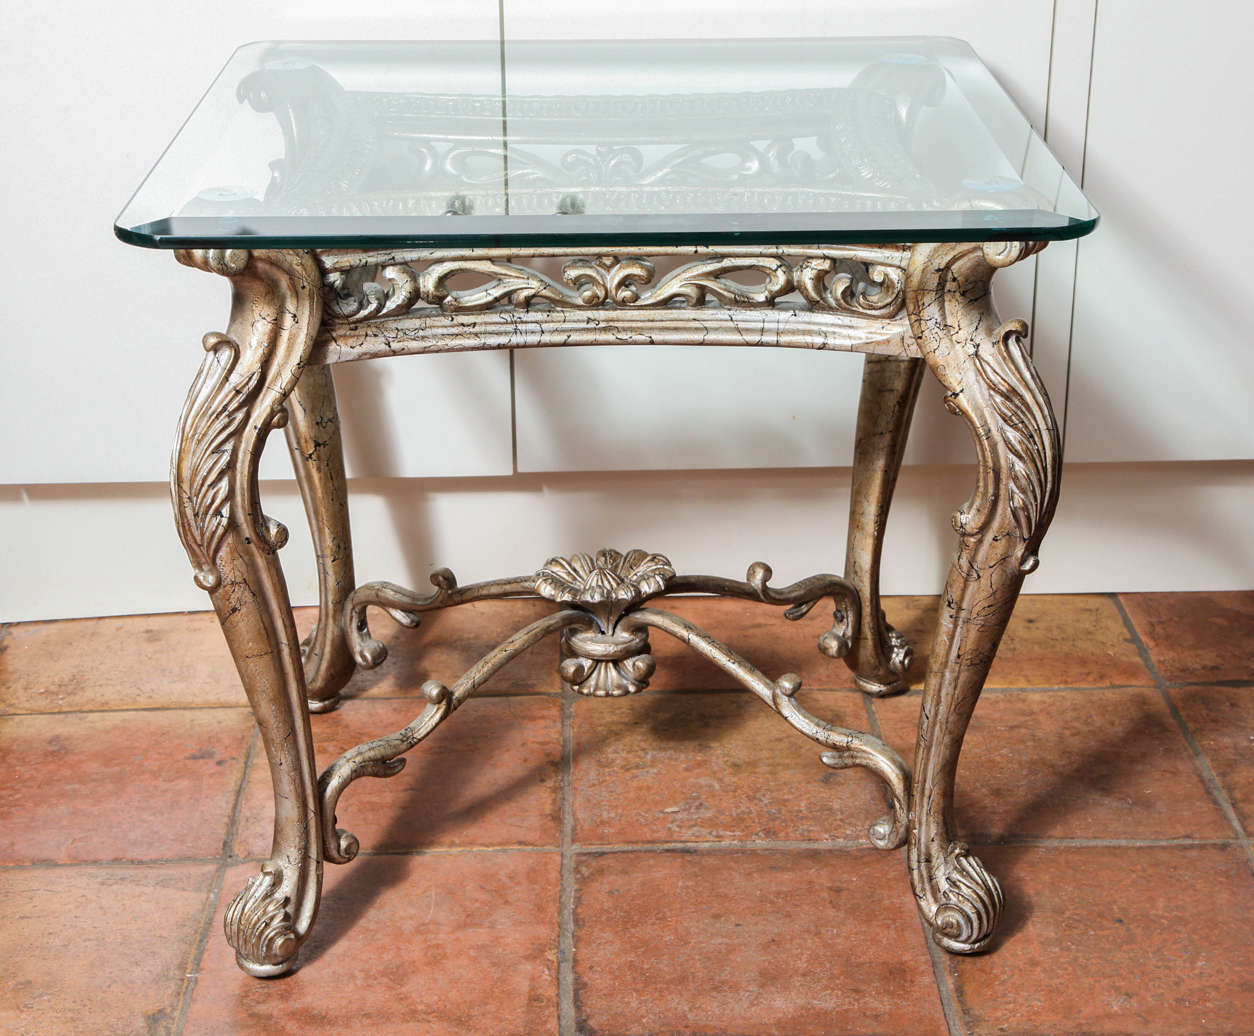 This gorgeous and classical side table has large proportions. The cabriole legs are carved with decorative leaves and C-scrolls.
The divided plate surrounded by C-scrolls and flowering rosettes offers more richness at the bottom than at the top